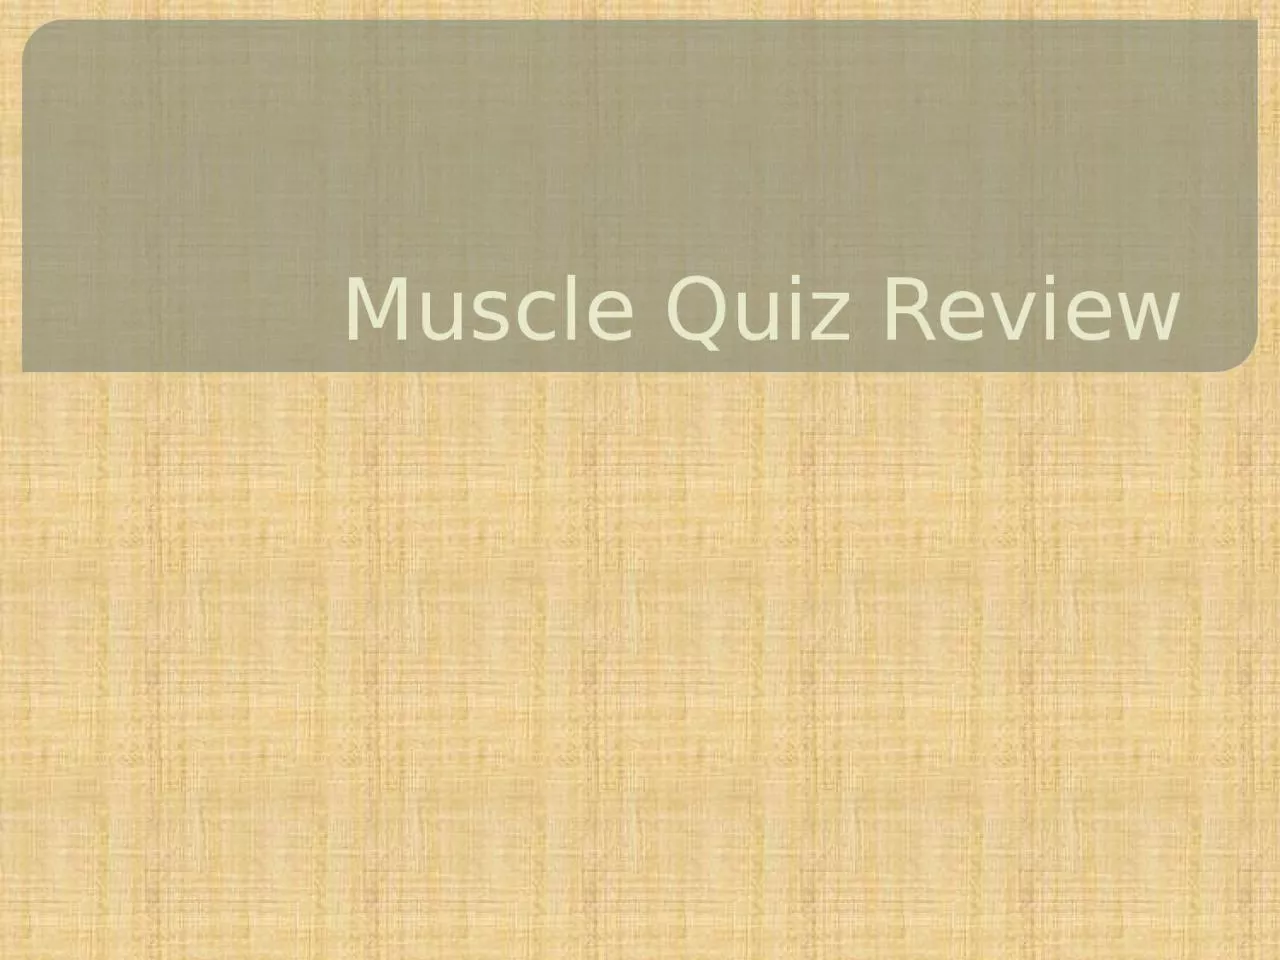 Muscle Quiz Review The shoulder muscle